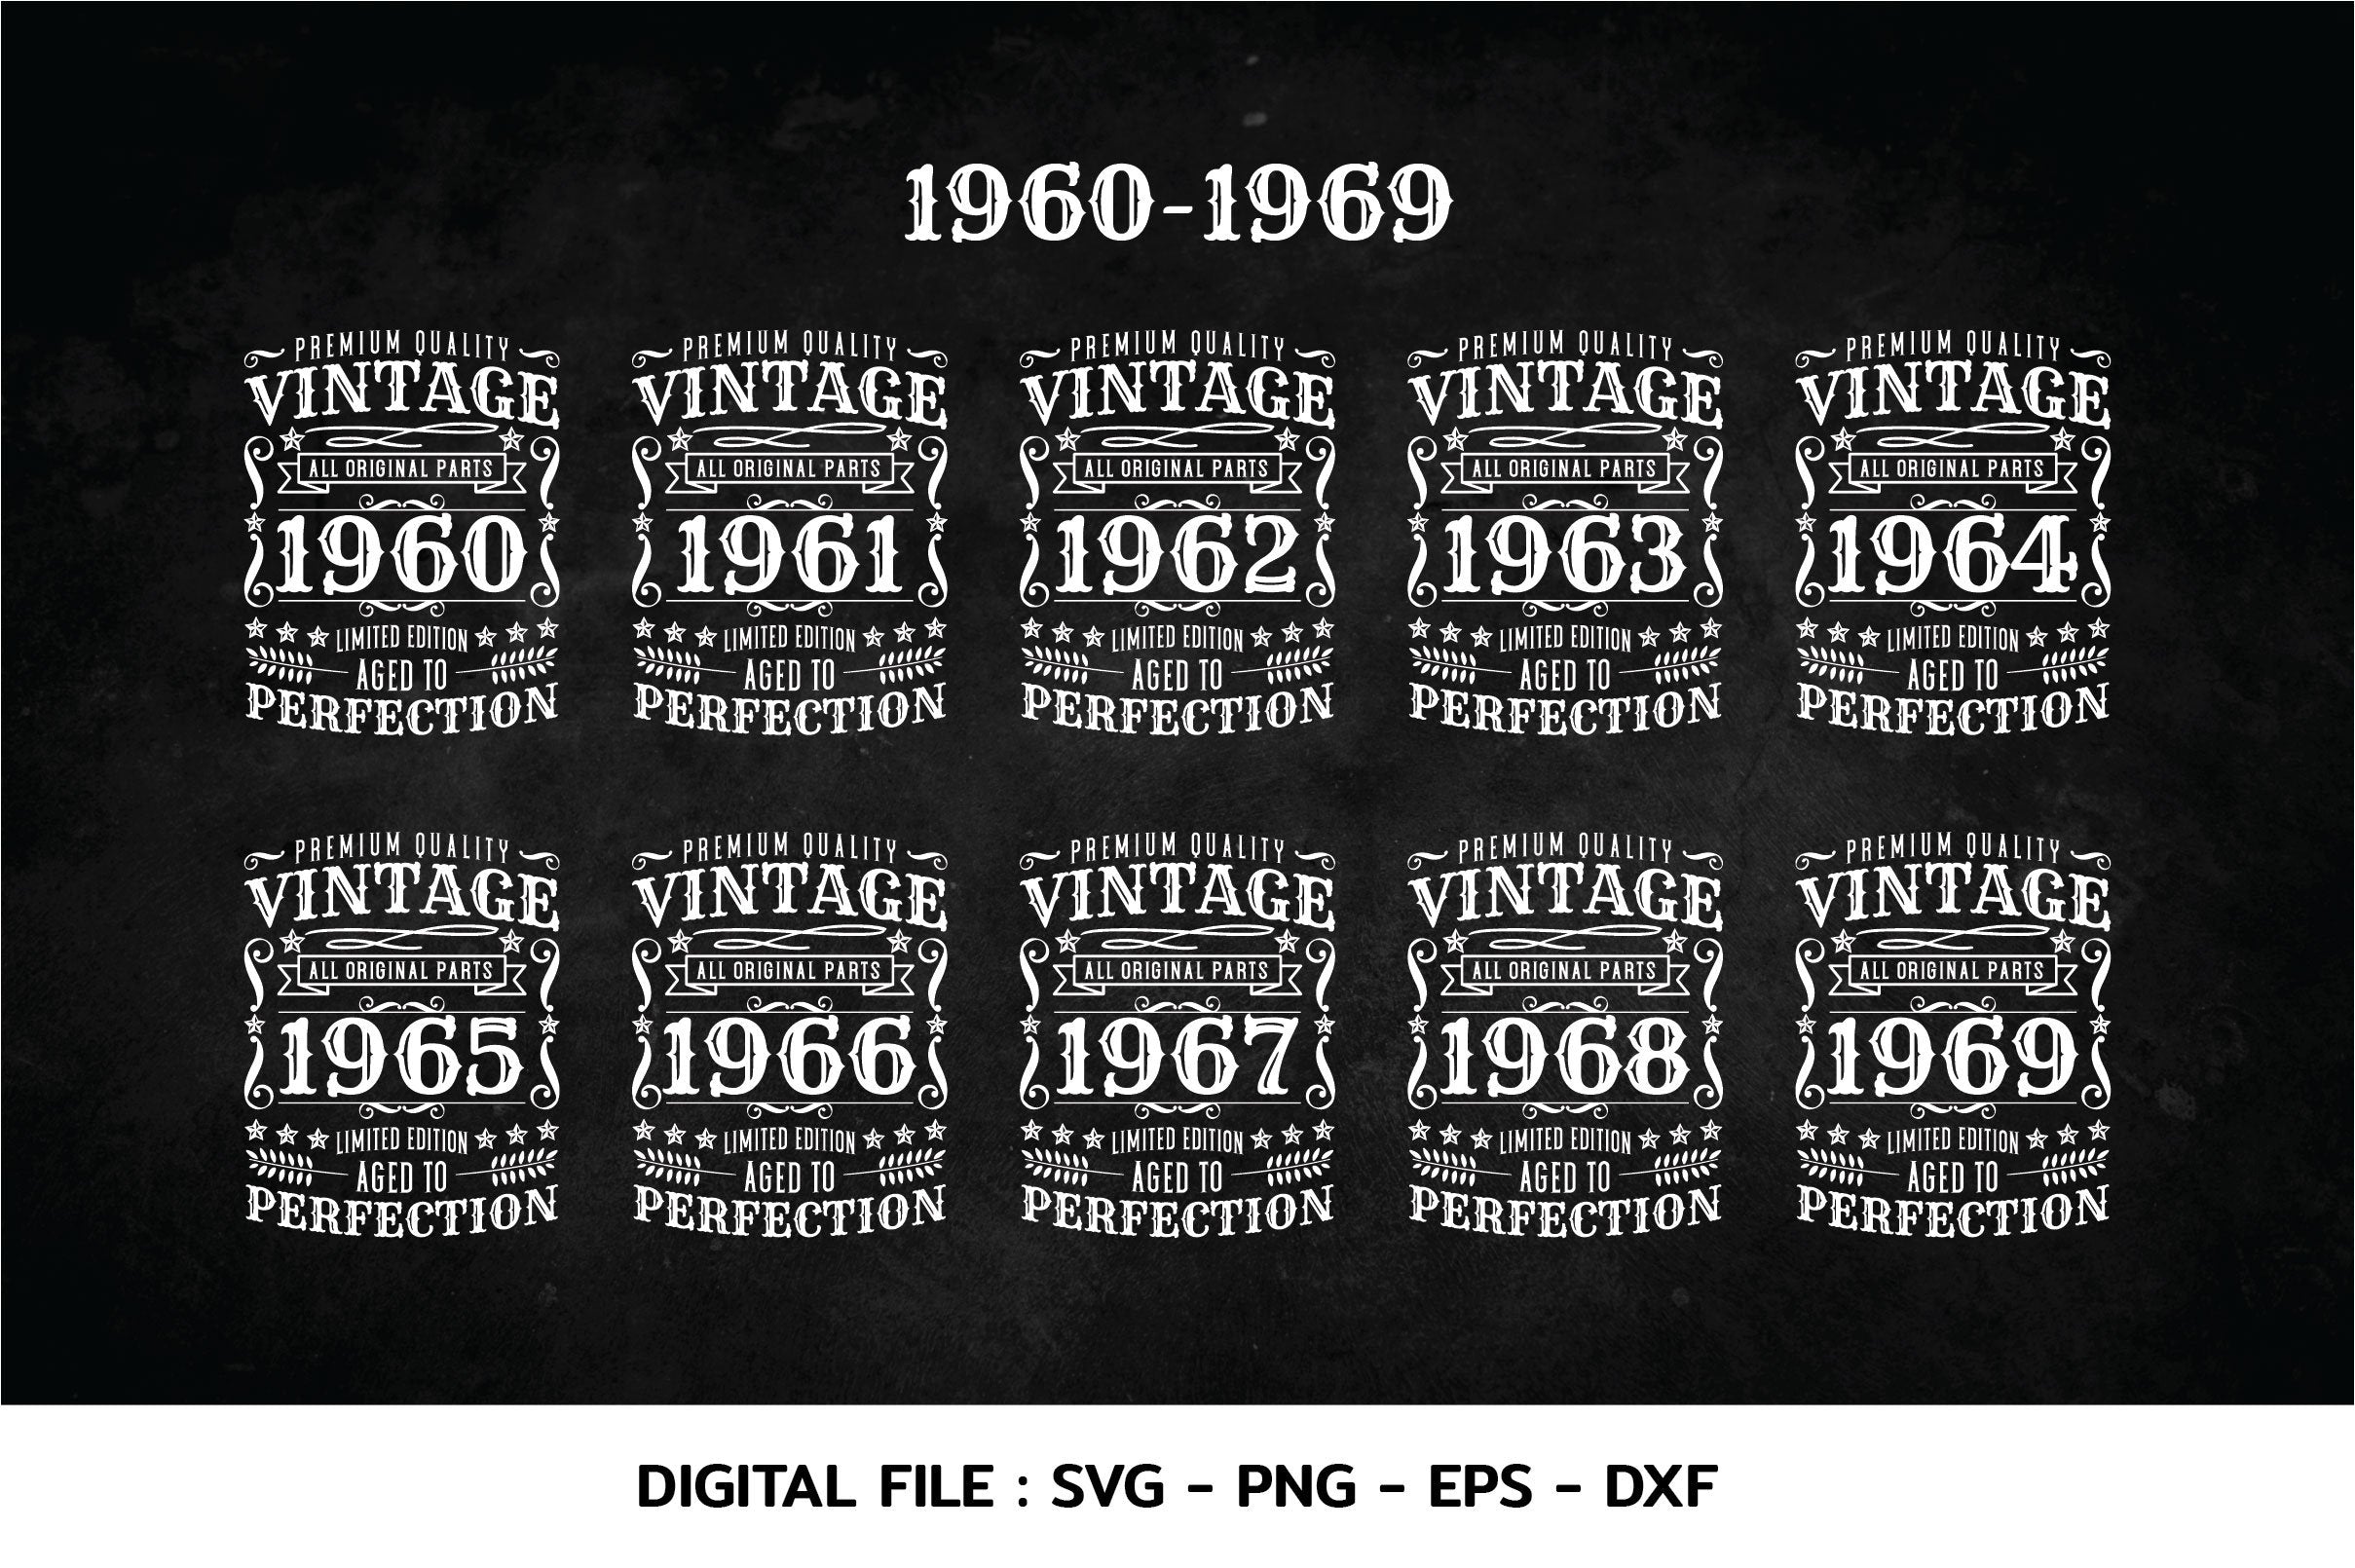 Download Birthday Vintage 1960 1969 Svg Aged To Perfection Birthday Premium Quality T Shirt Cricut Files Svg Png Eps Dxf Instant Download So Fontsy